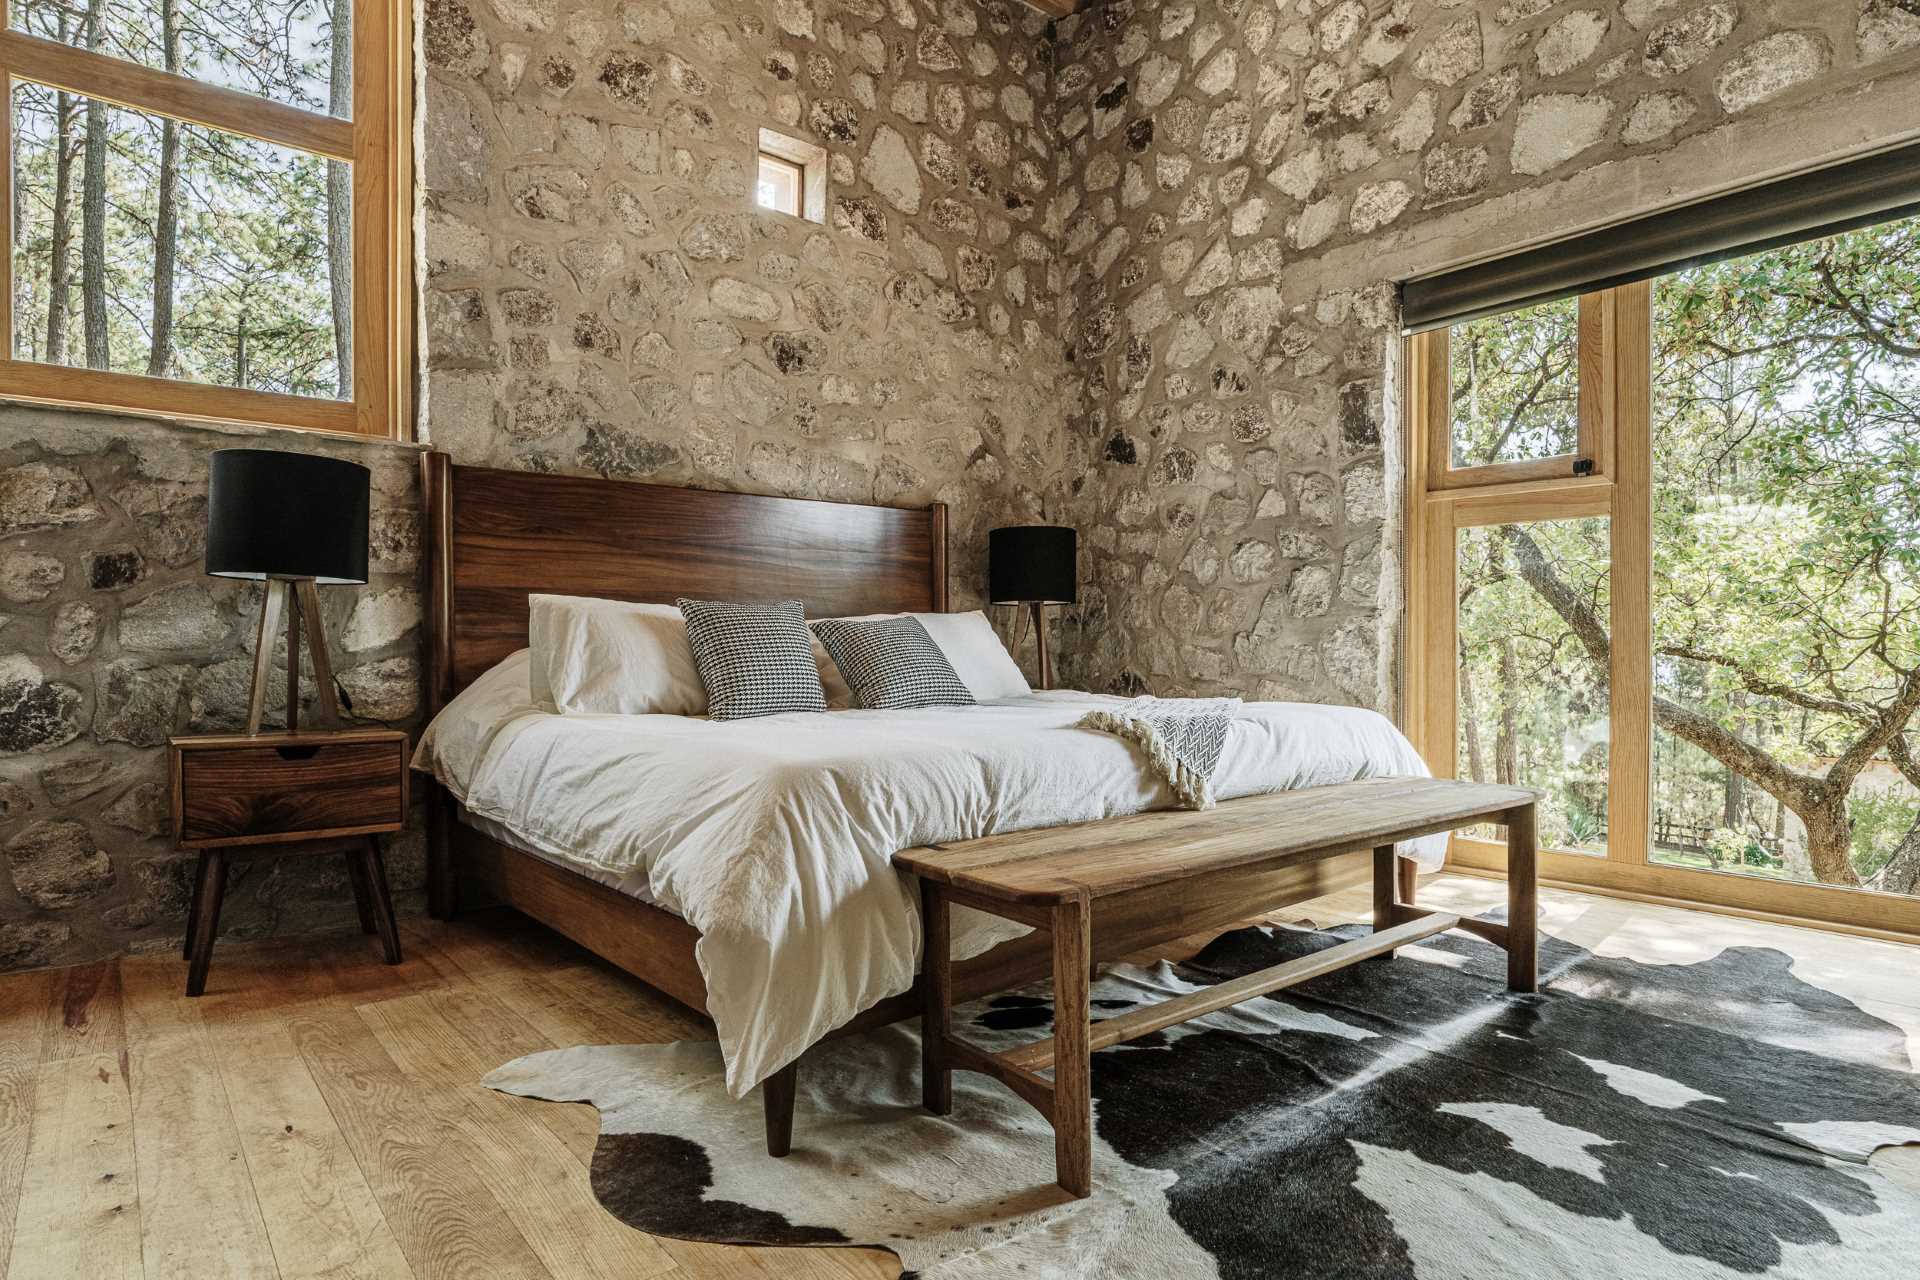 A modern stone and wood bedroom with treetop views.